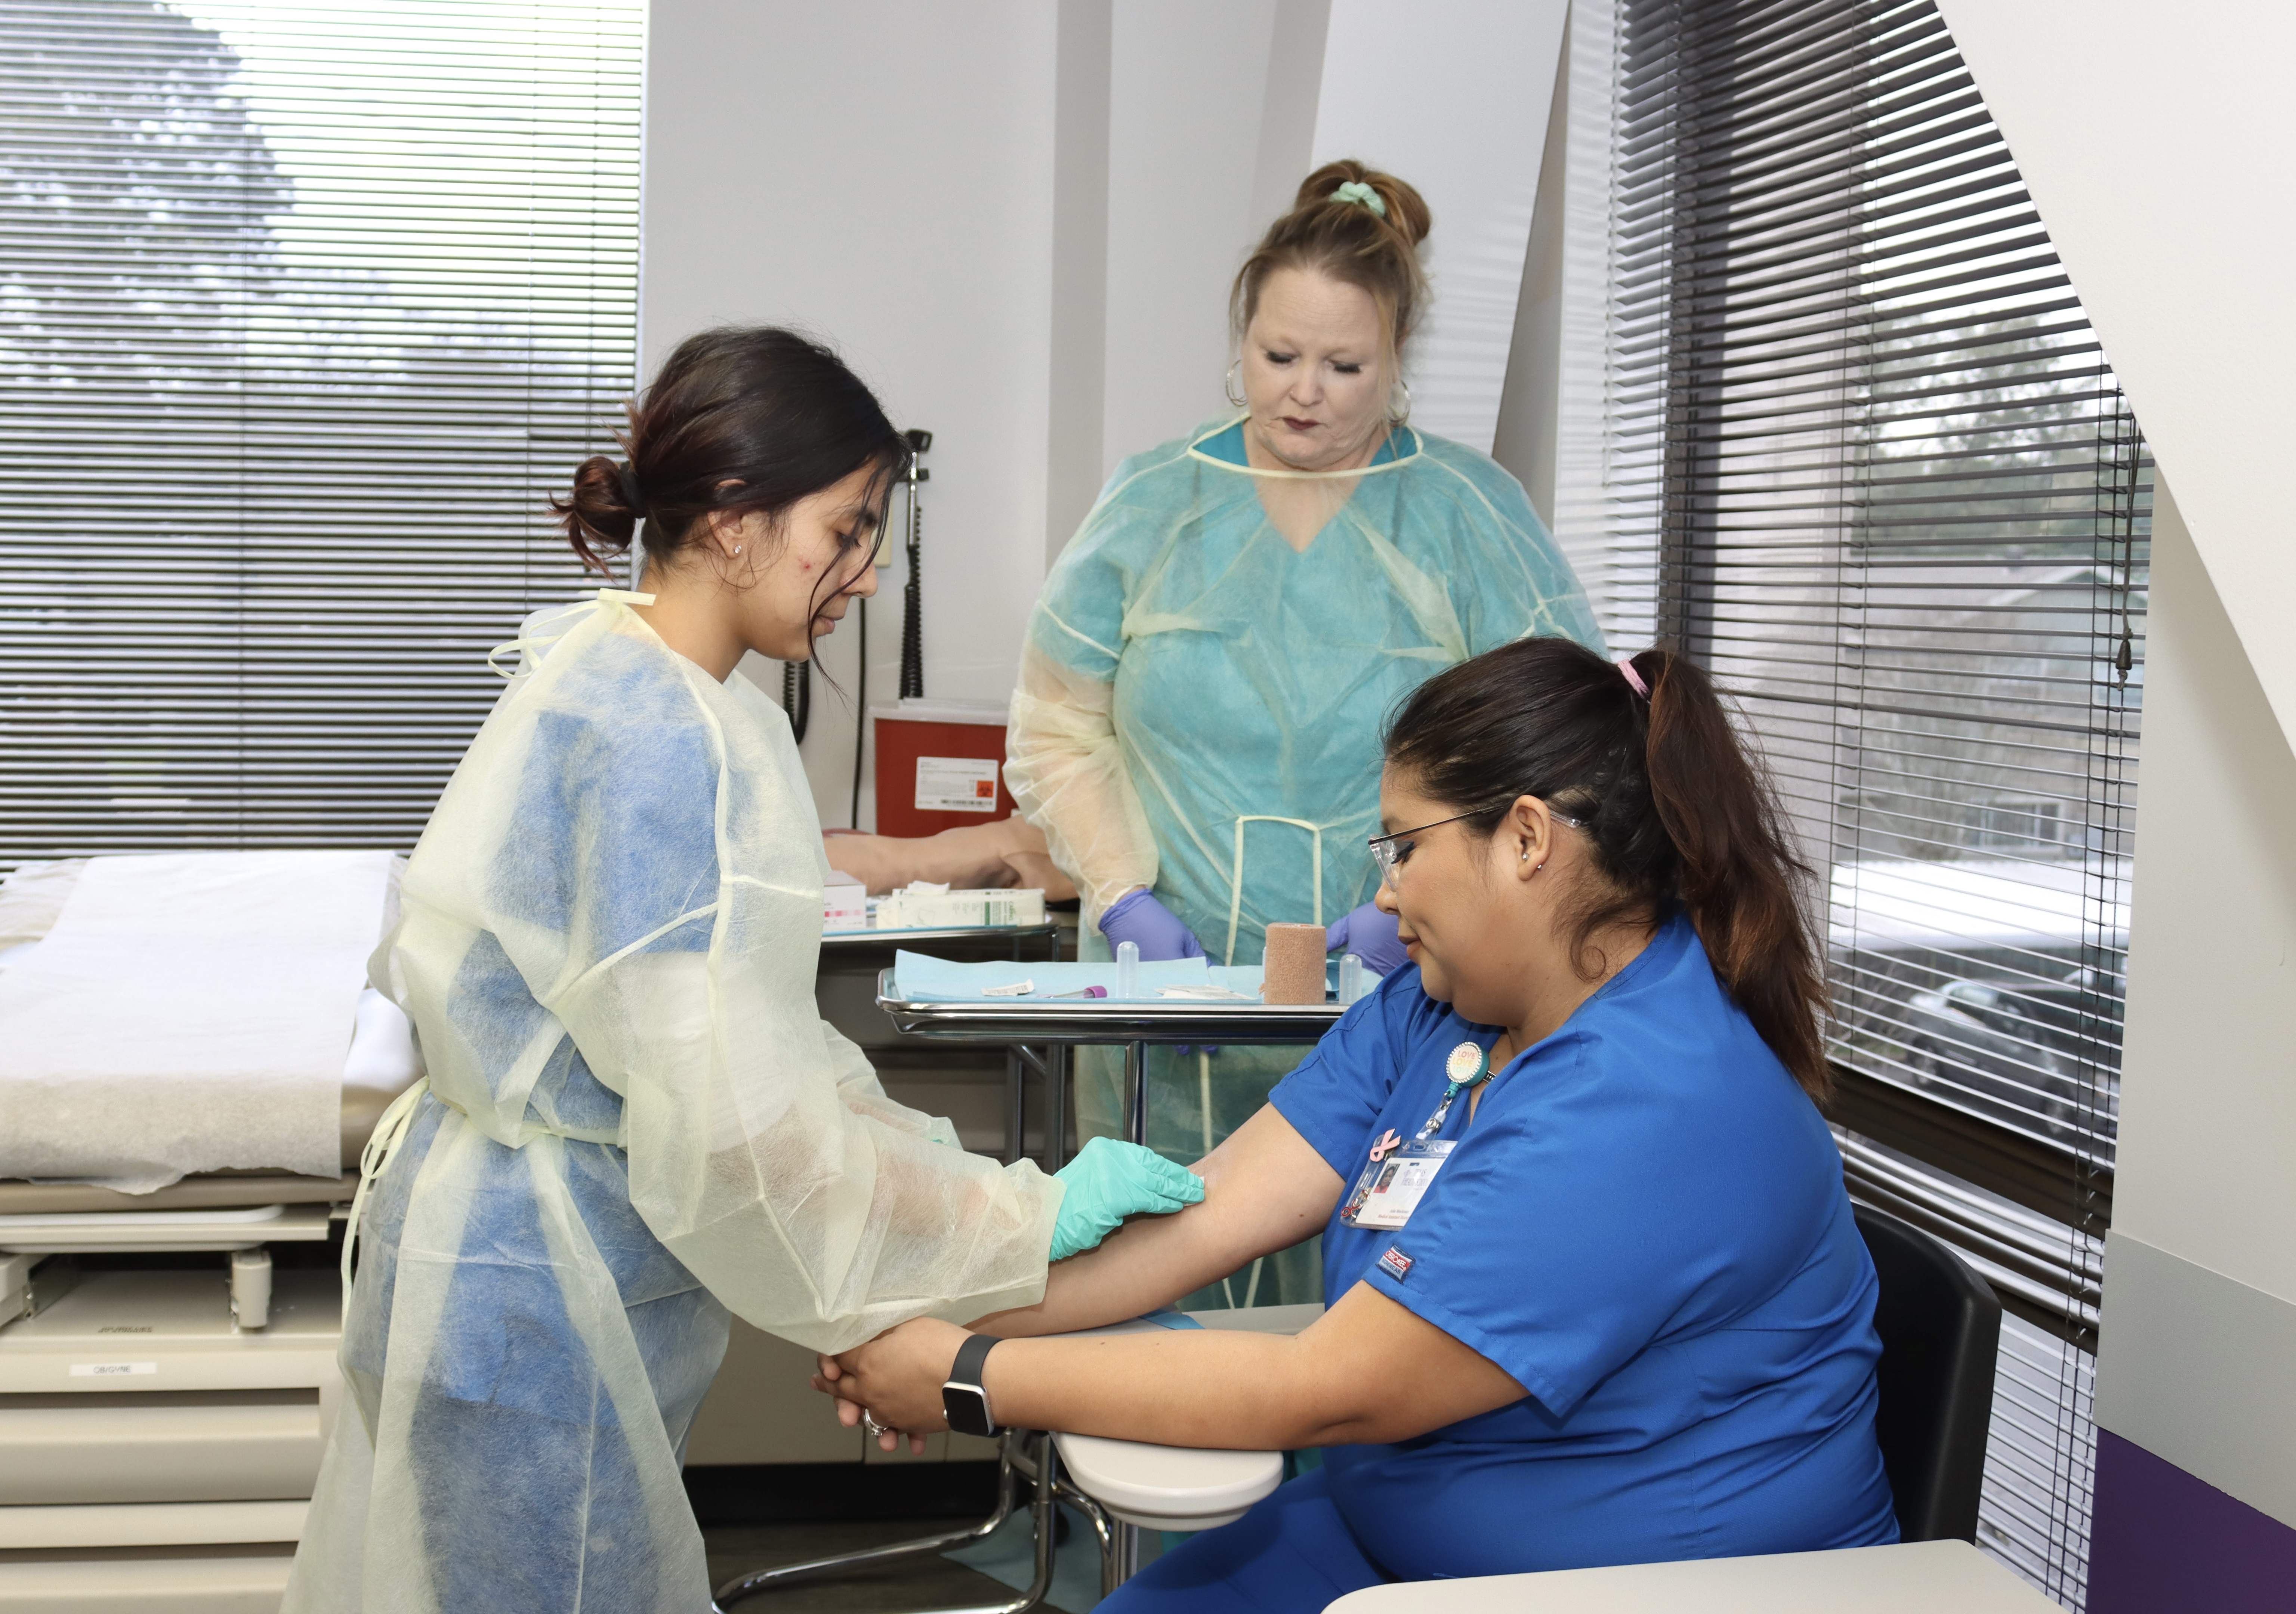 Your Path to Becoming a Medical Assistant